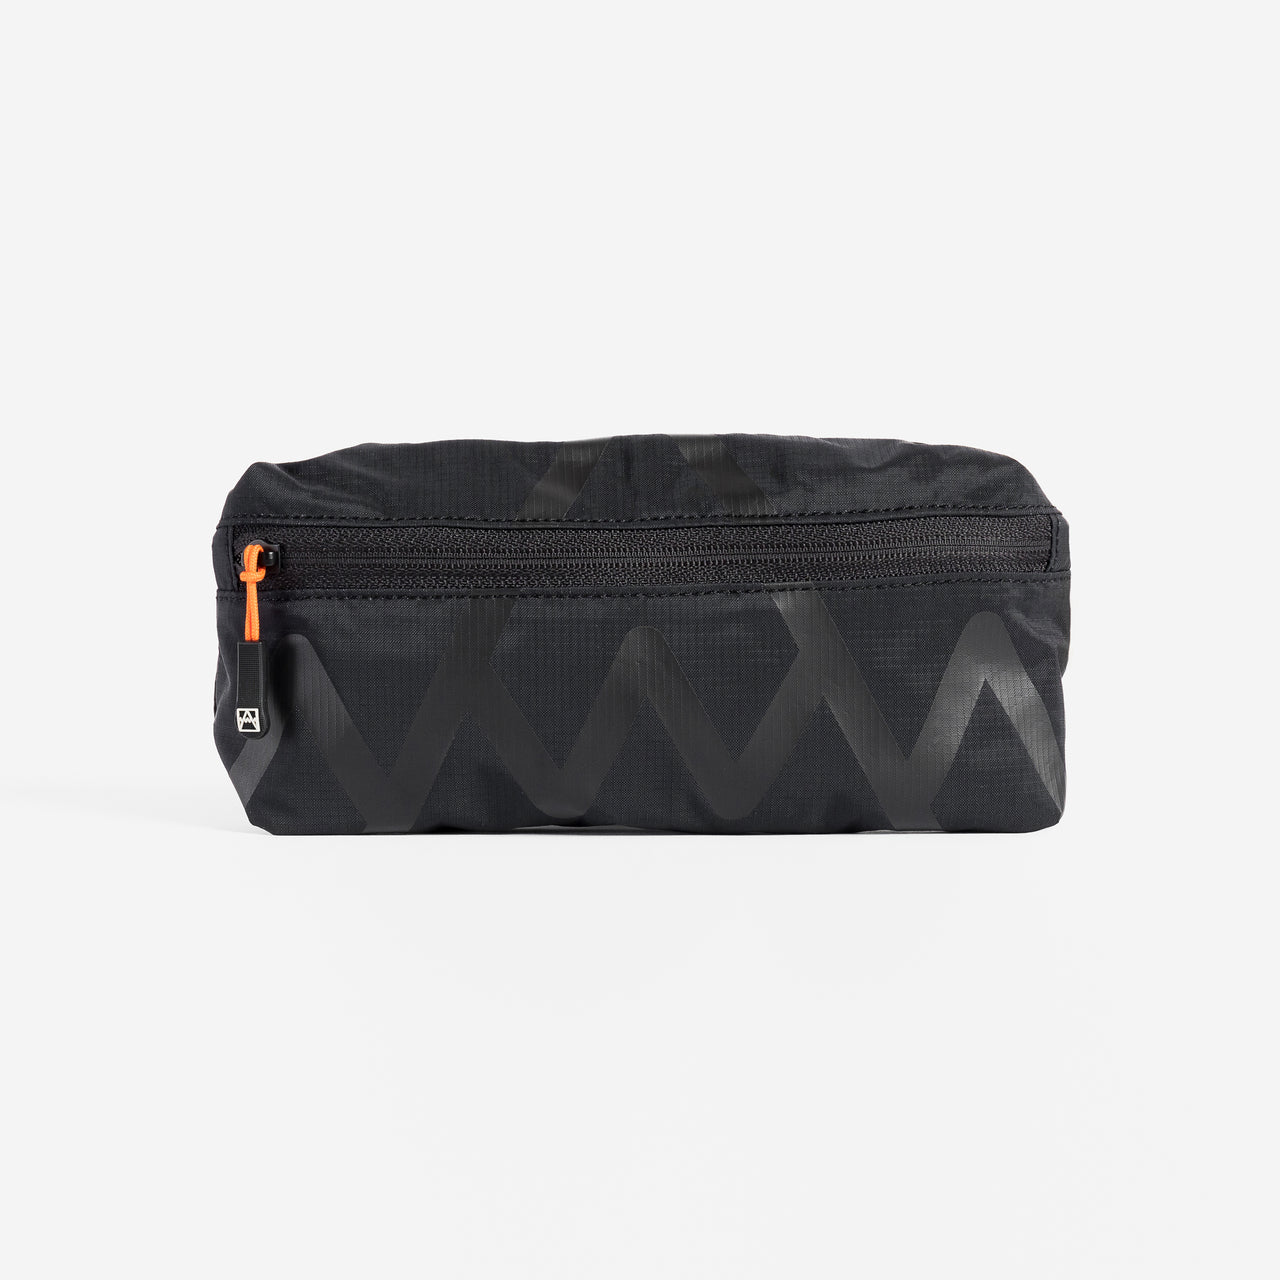 Front view of the All Black packable Ultra Light Crossbody Bag packed into it's pocket